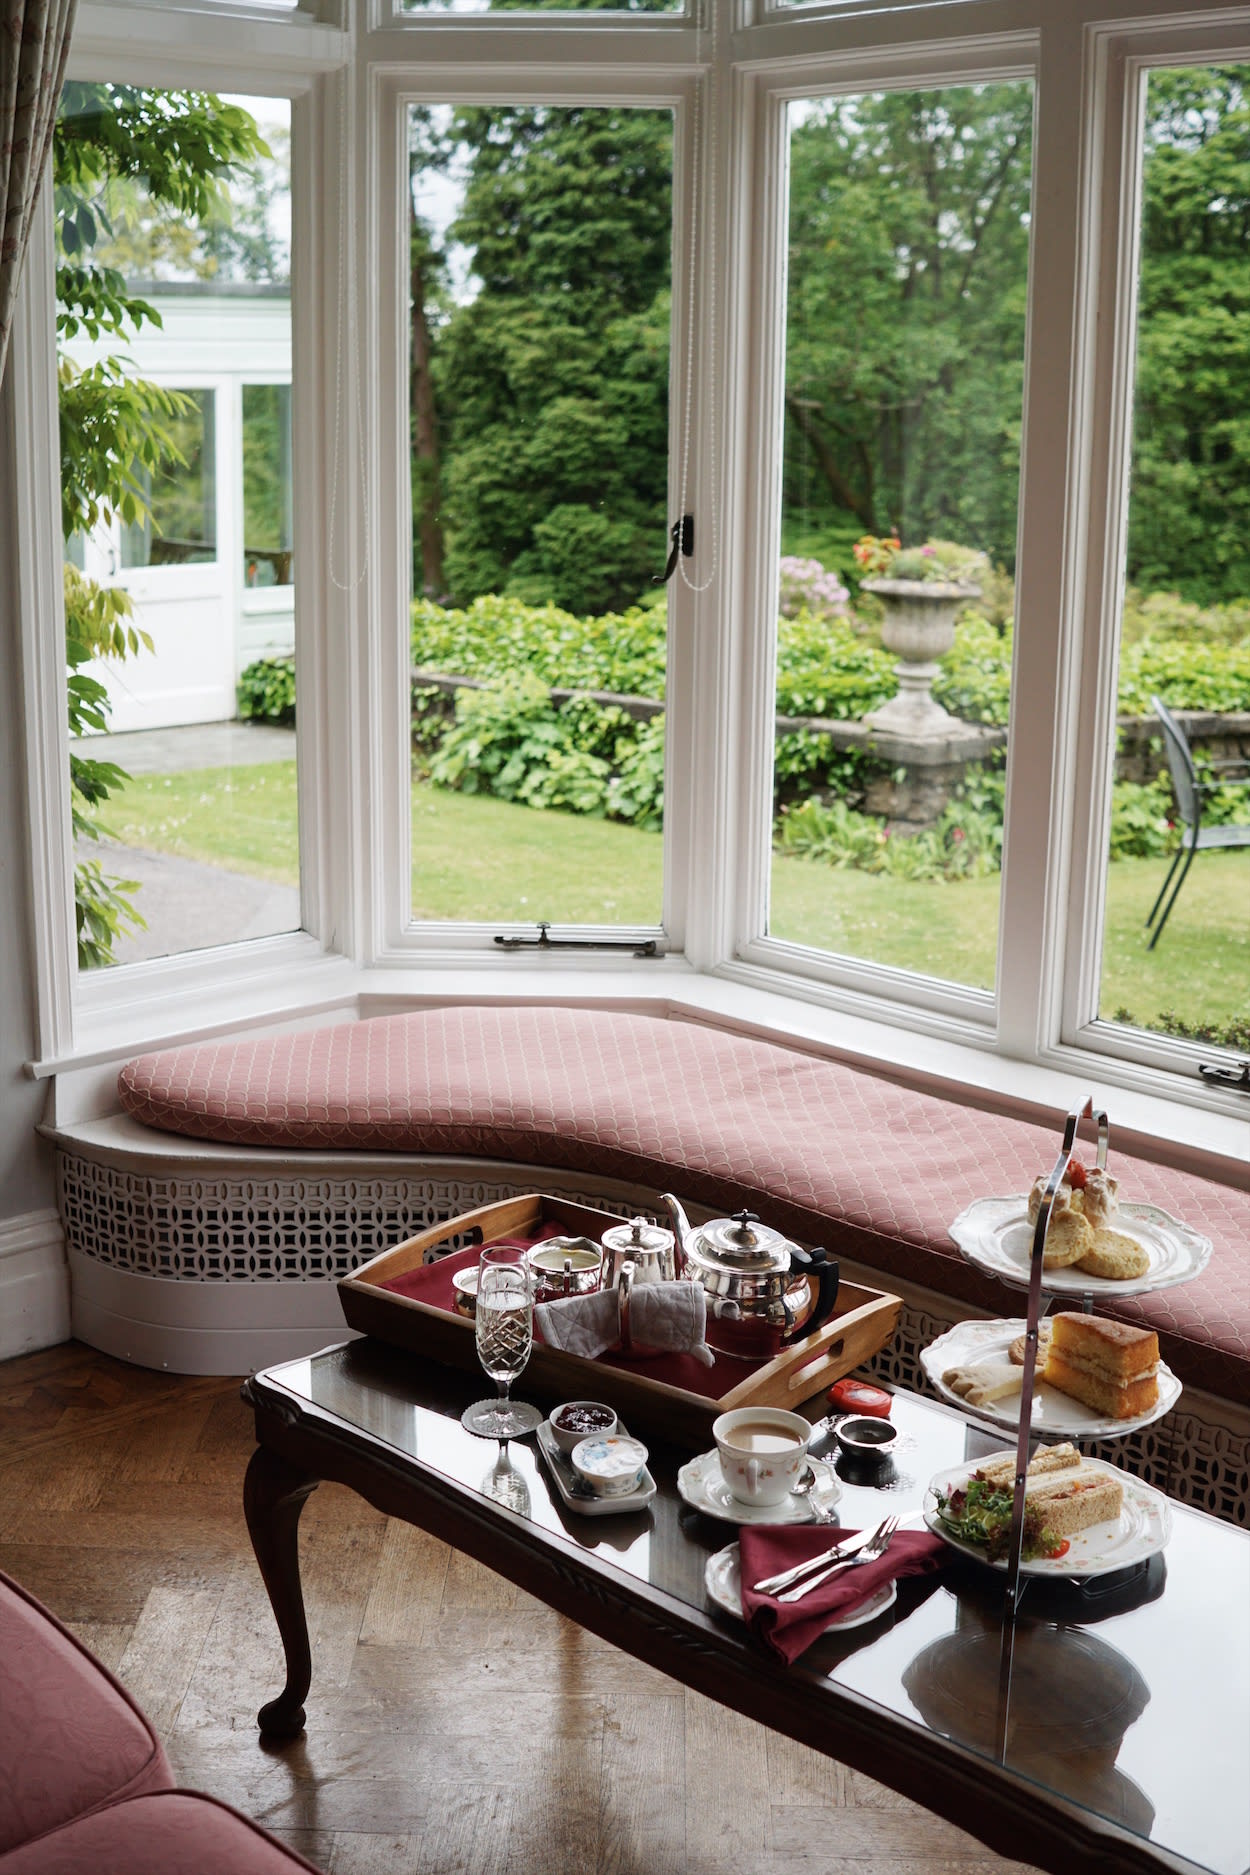 Lake District bed and breakfast